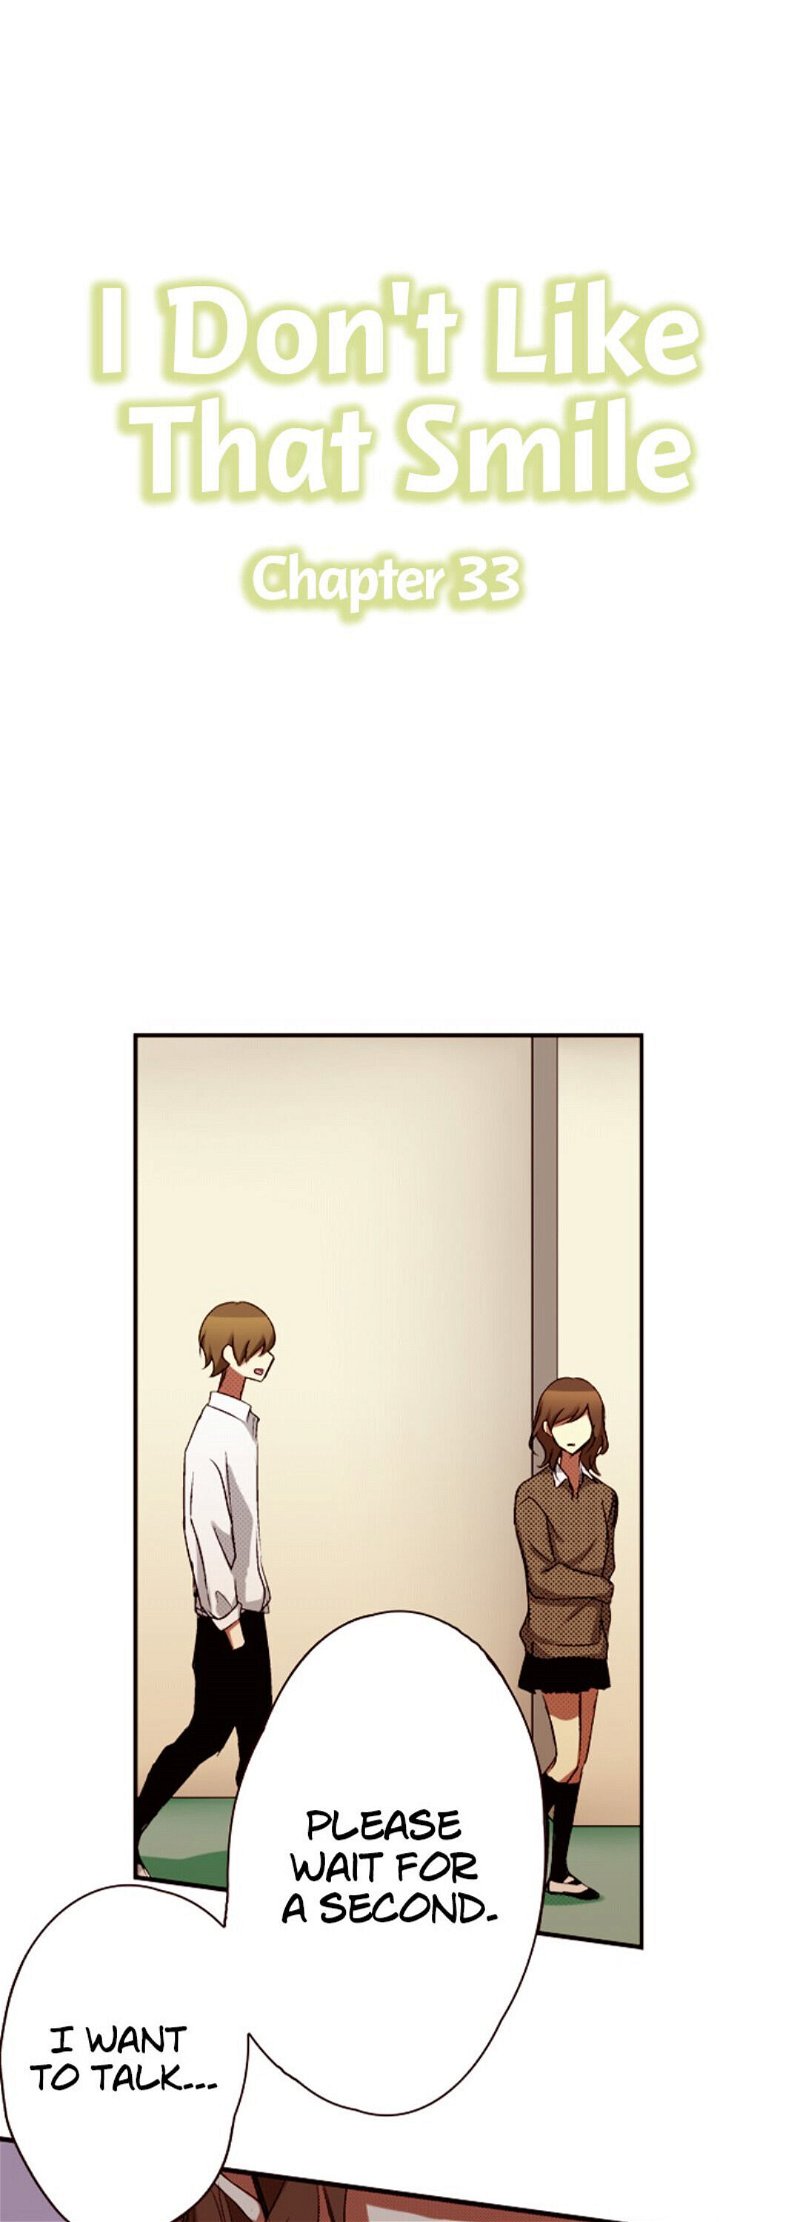 I Don’t Like That Smile Chapter 33 - Page 1